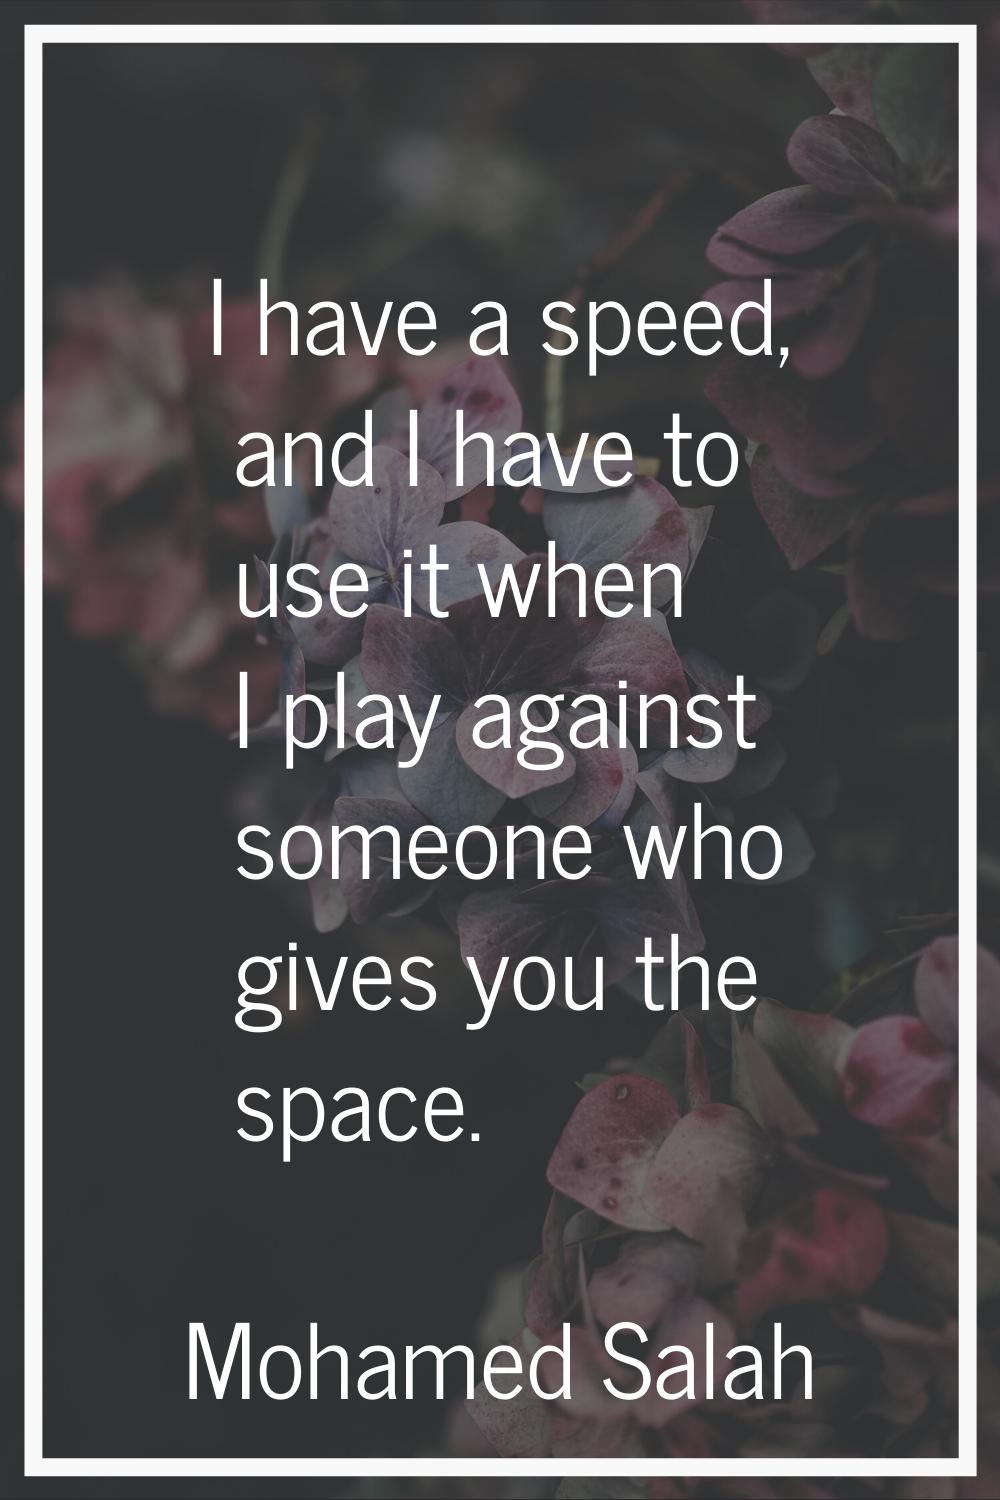 I have a speed, and I have to use it when I play against someone who gives you the space.